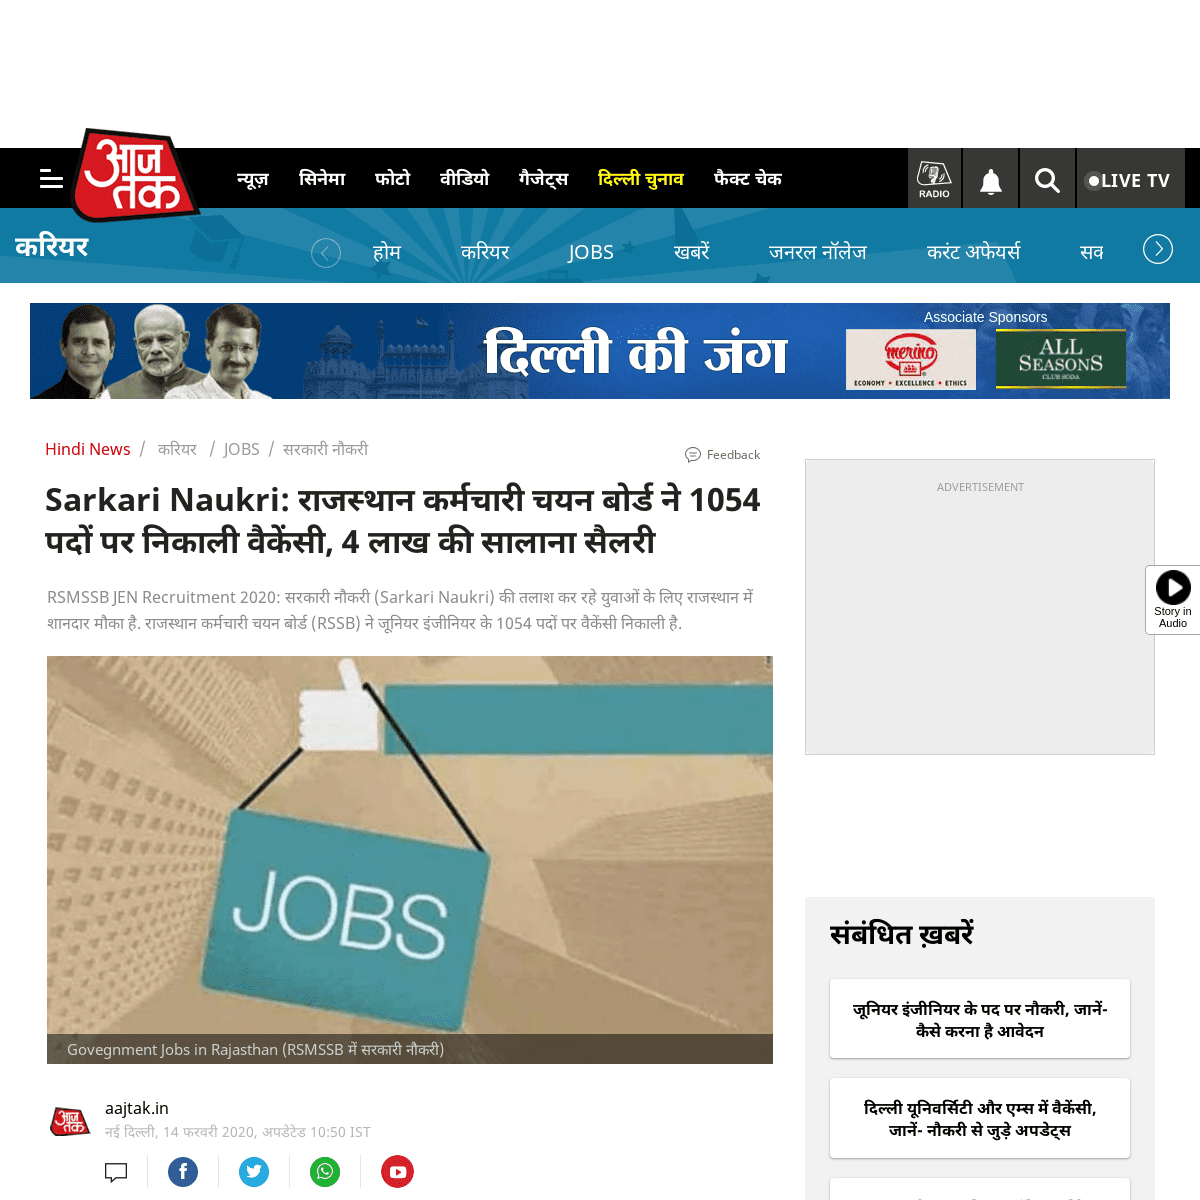 A complete backup of aajtak.intoday.in/education/story/rajasthan-staff-selection-board-recruitment-2020-rsmssb-sarkari-naukri-no